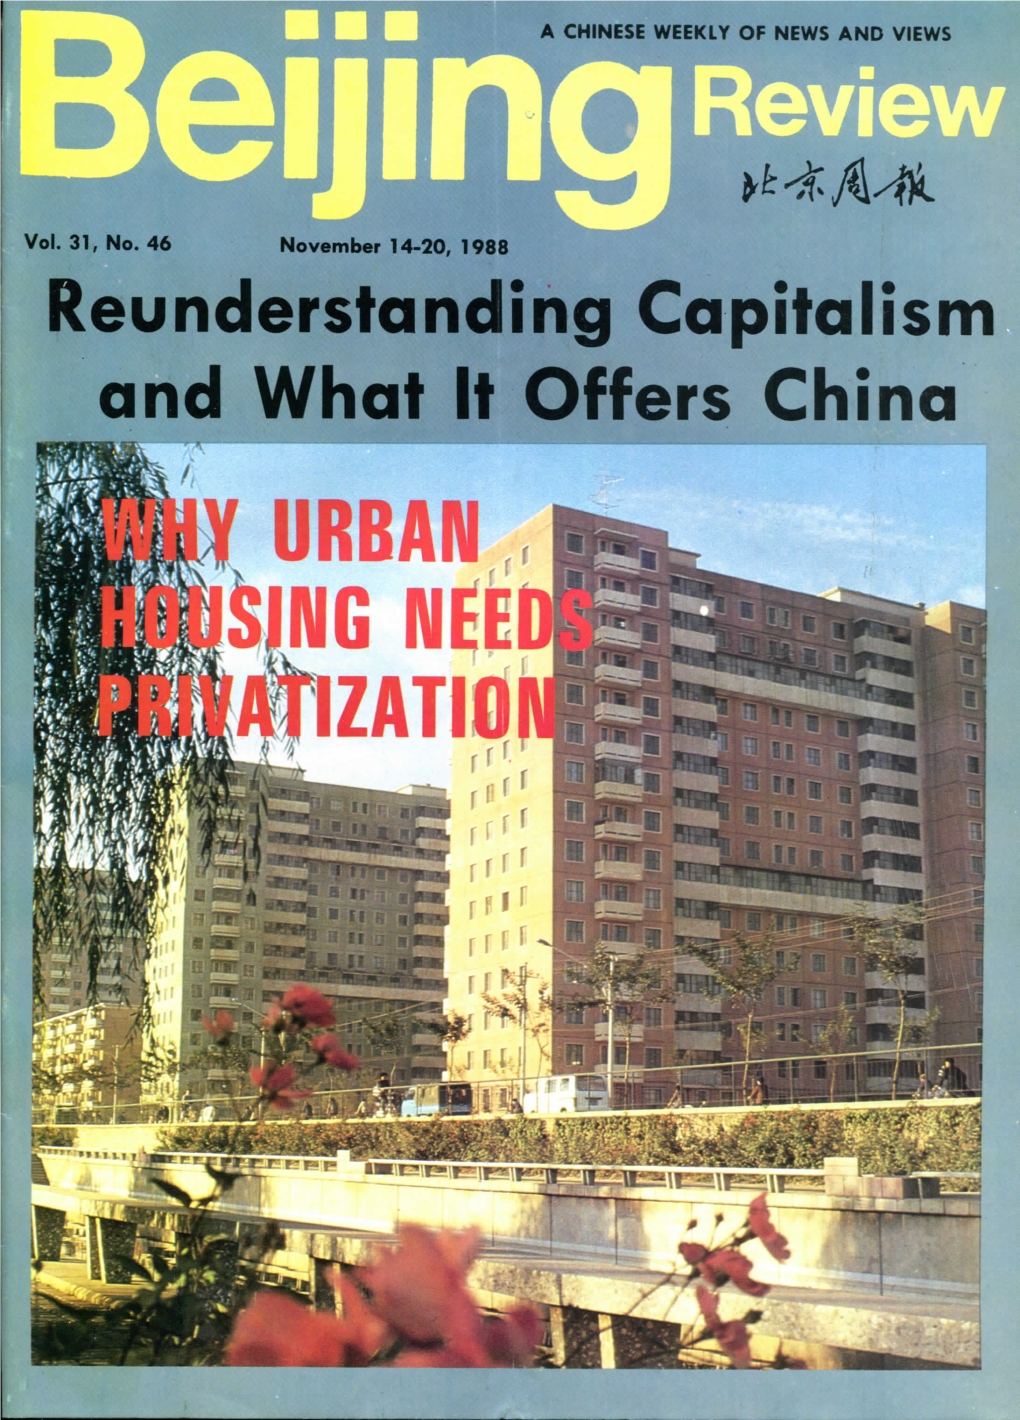 Reunderstanding Capitalism and What It Offers China Capturing a Unique Scene